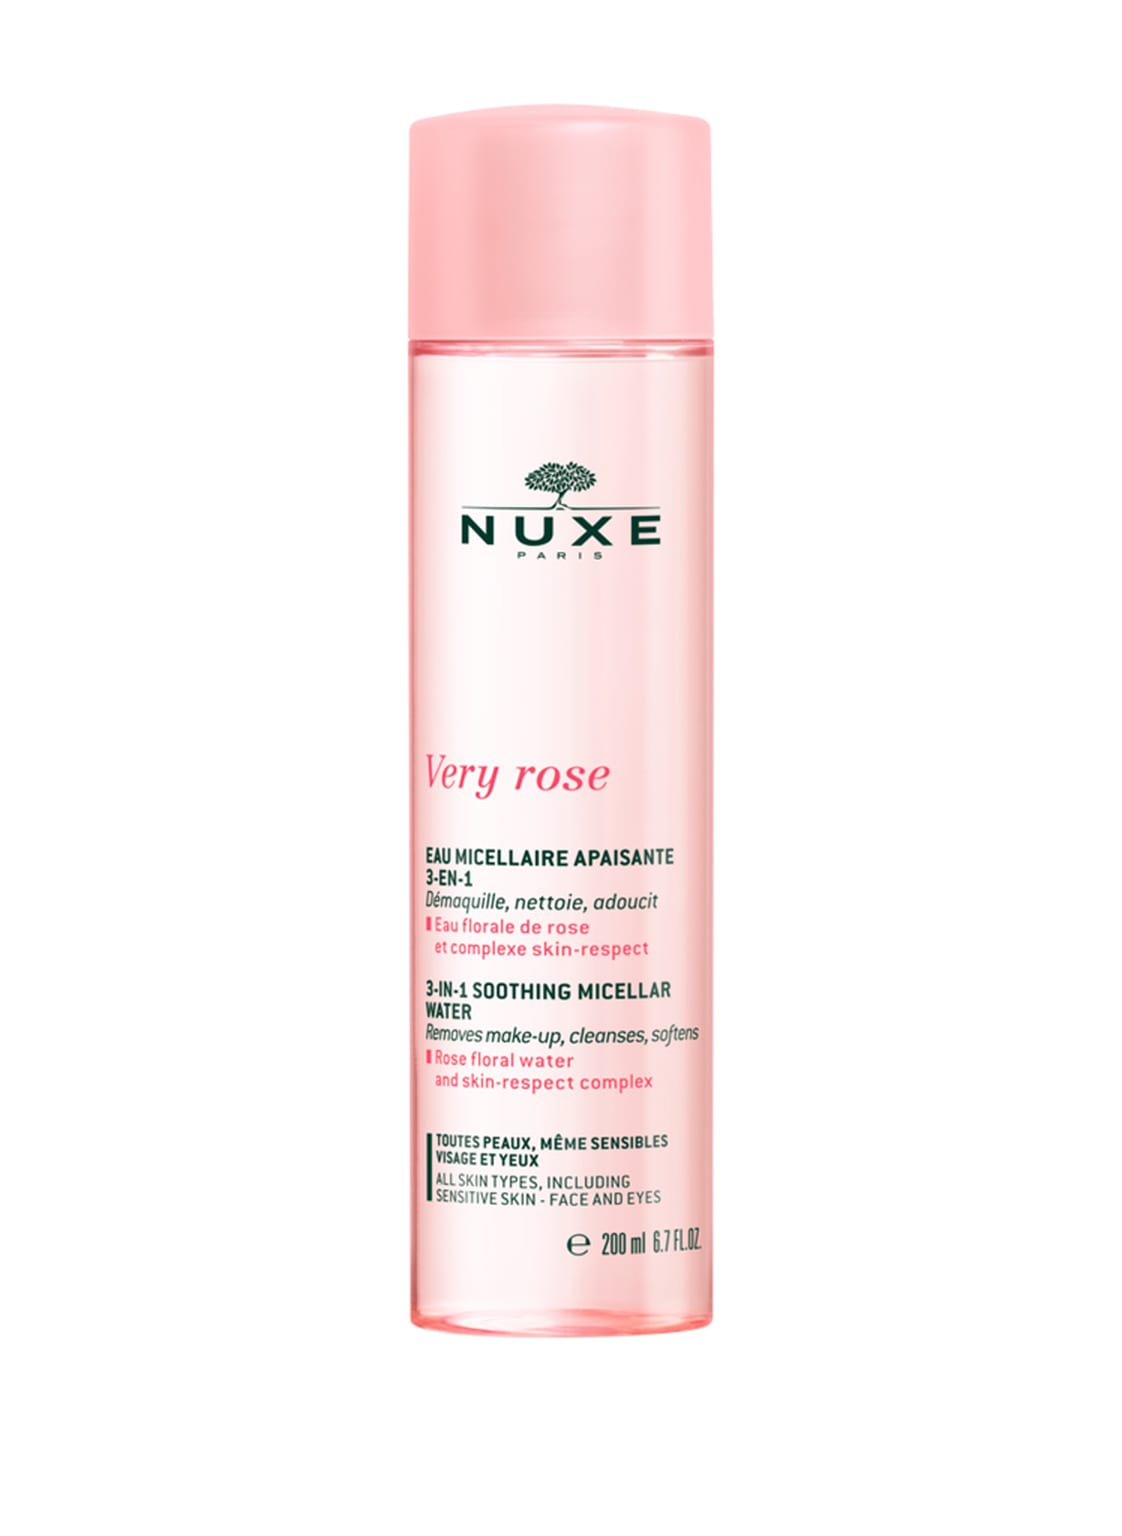 Nuxe Very Rose 3-in-1 Soothing Micellar Water 200 ml von NUXE